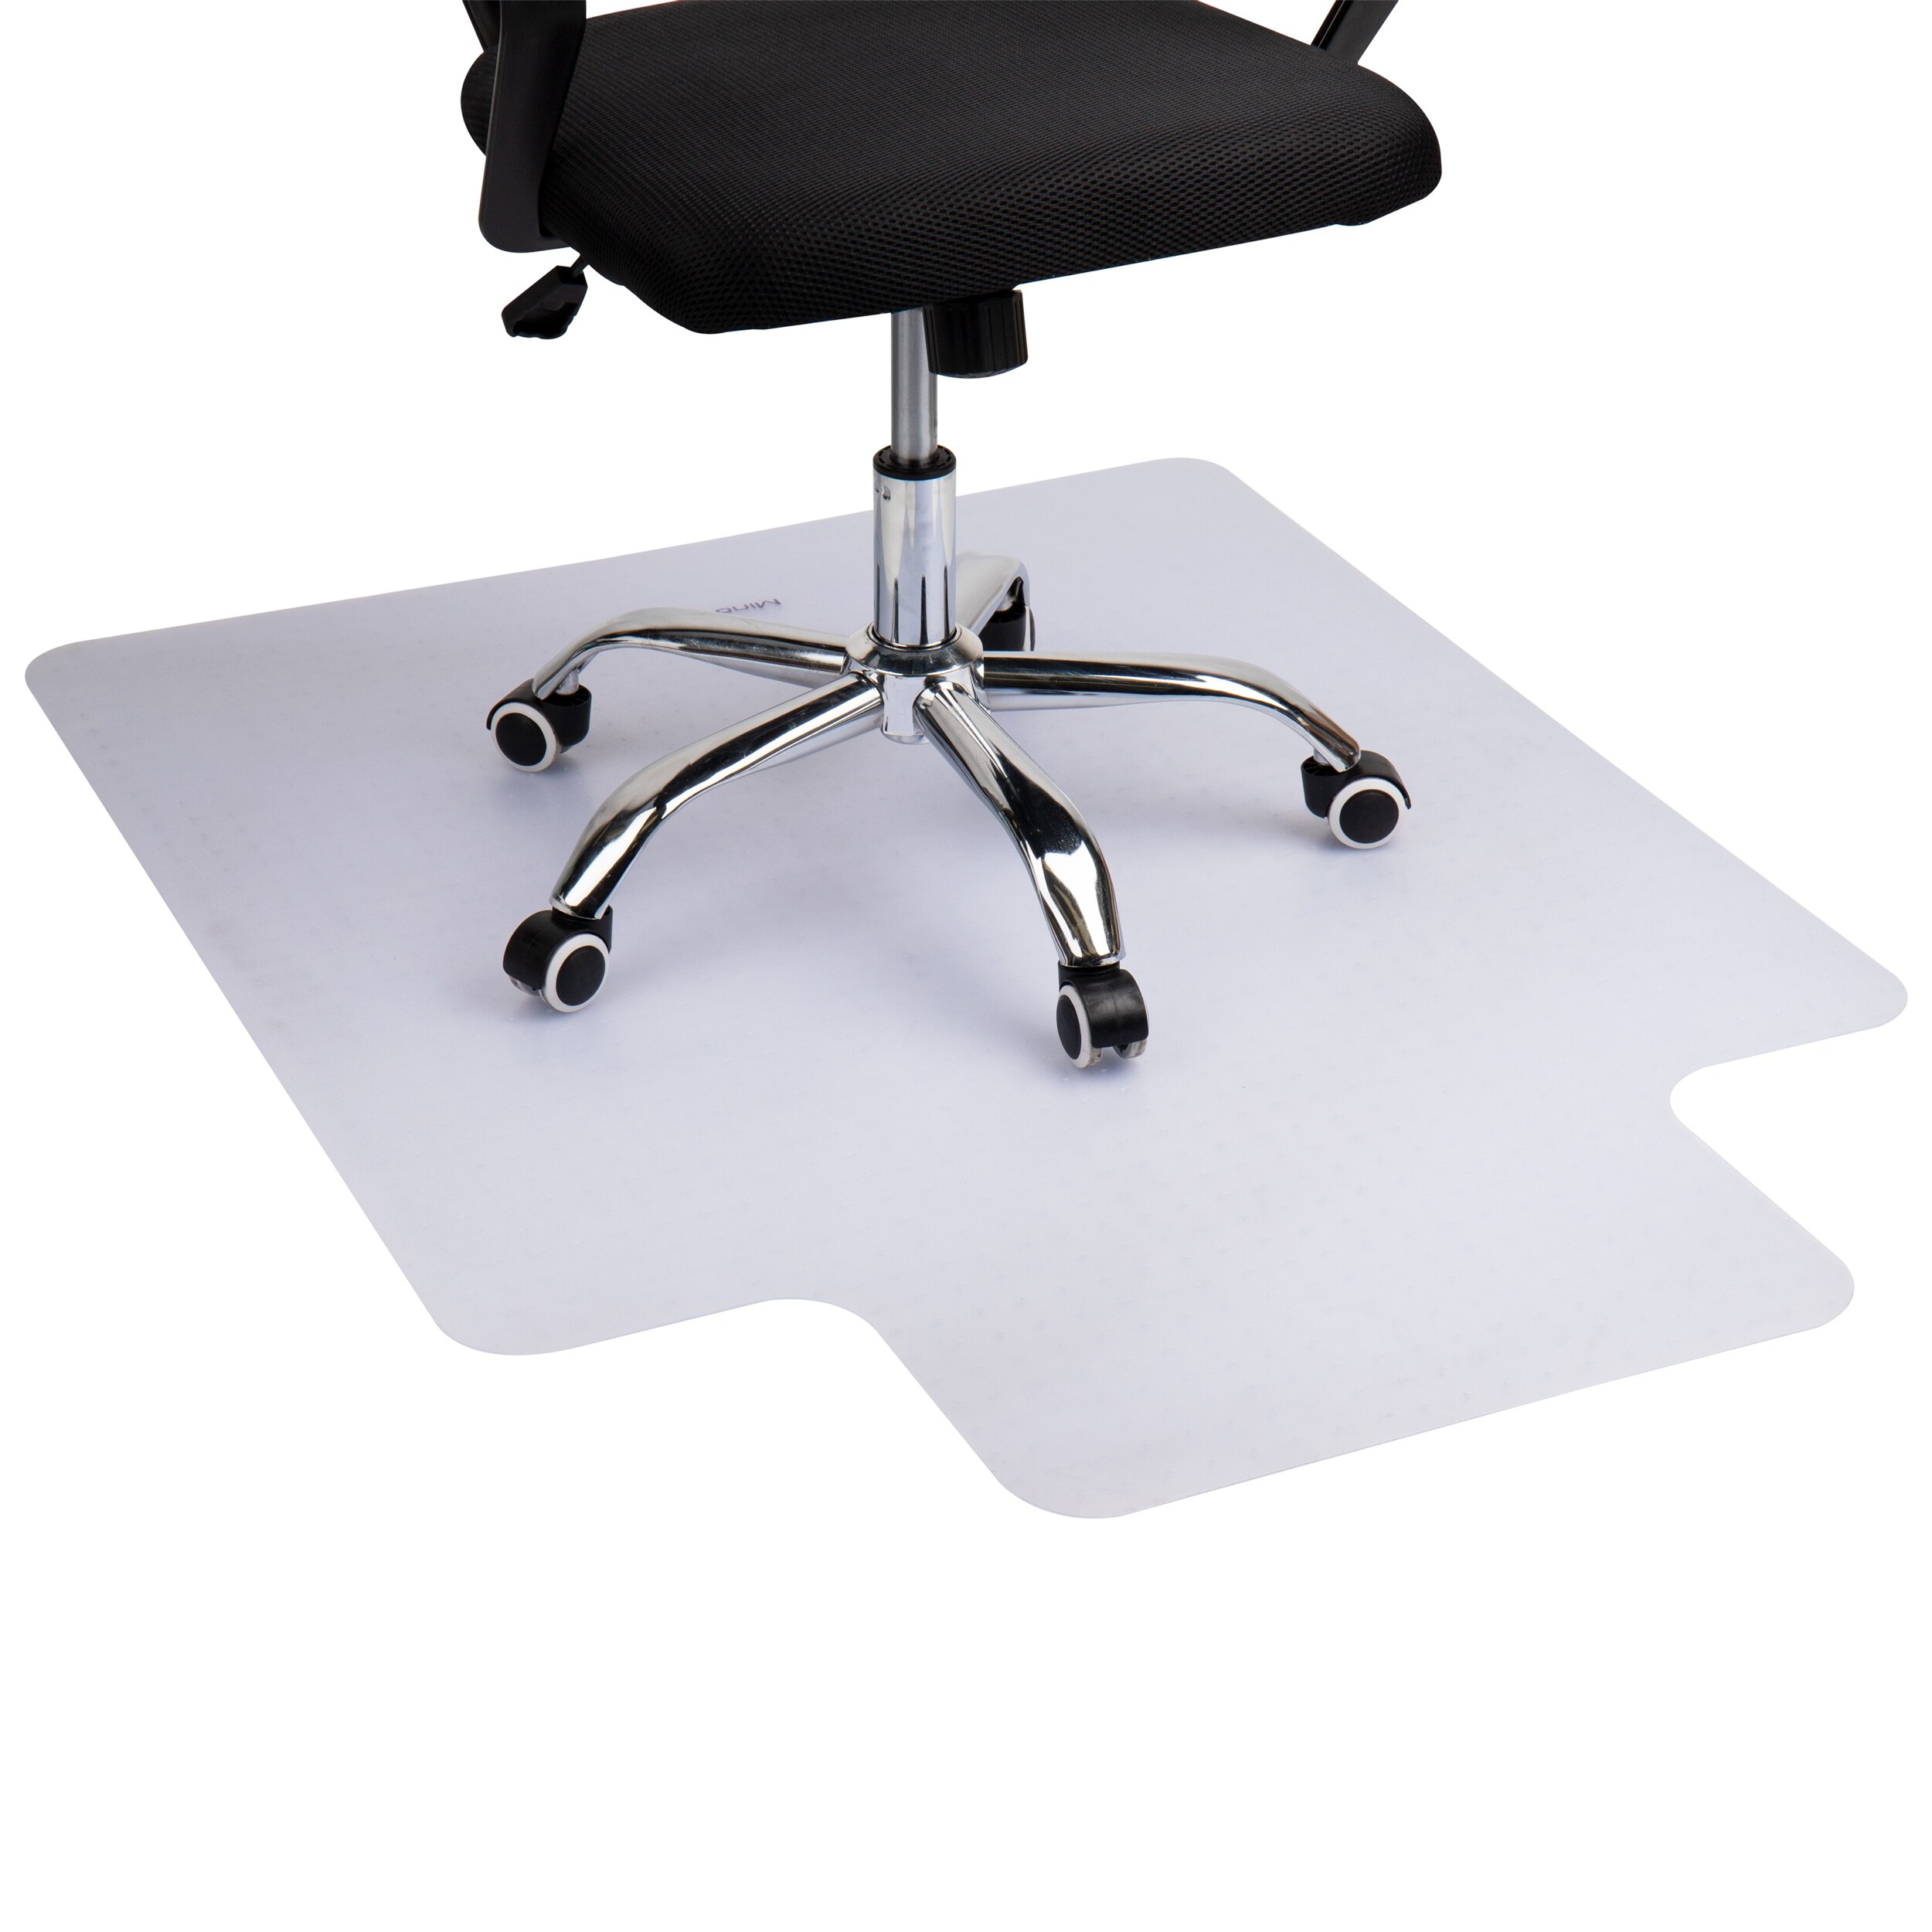 https://ak1.ostkcdn.com/images/products/is/images/direct/265a4d8218fb845d0de792a531d94cf40d8abff5/Mind-Reader-9-to-5-Collection-Office-Chair-Mat-48-x-36%2C-PVC.jpg